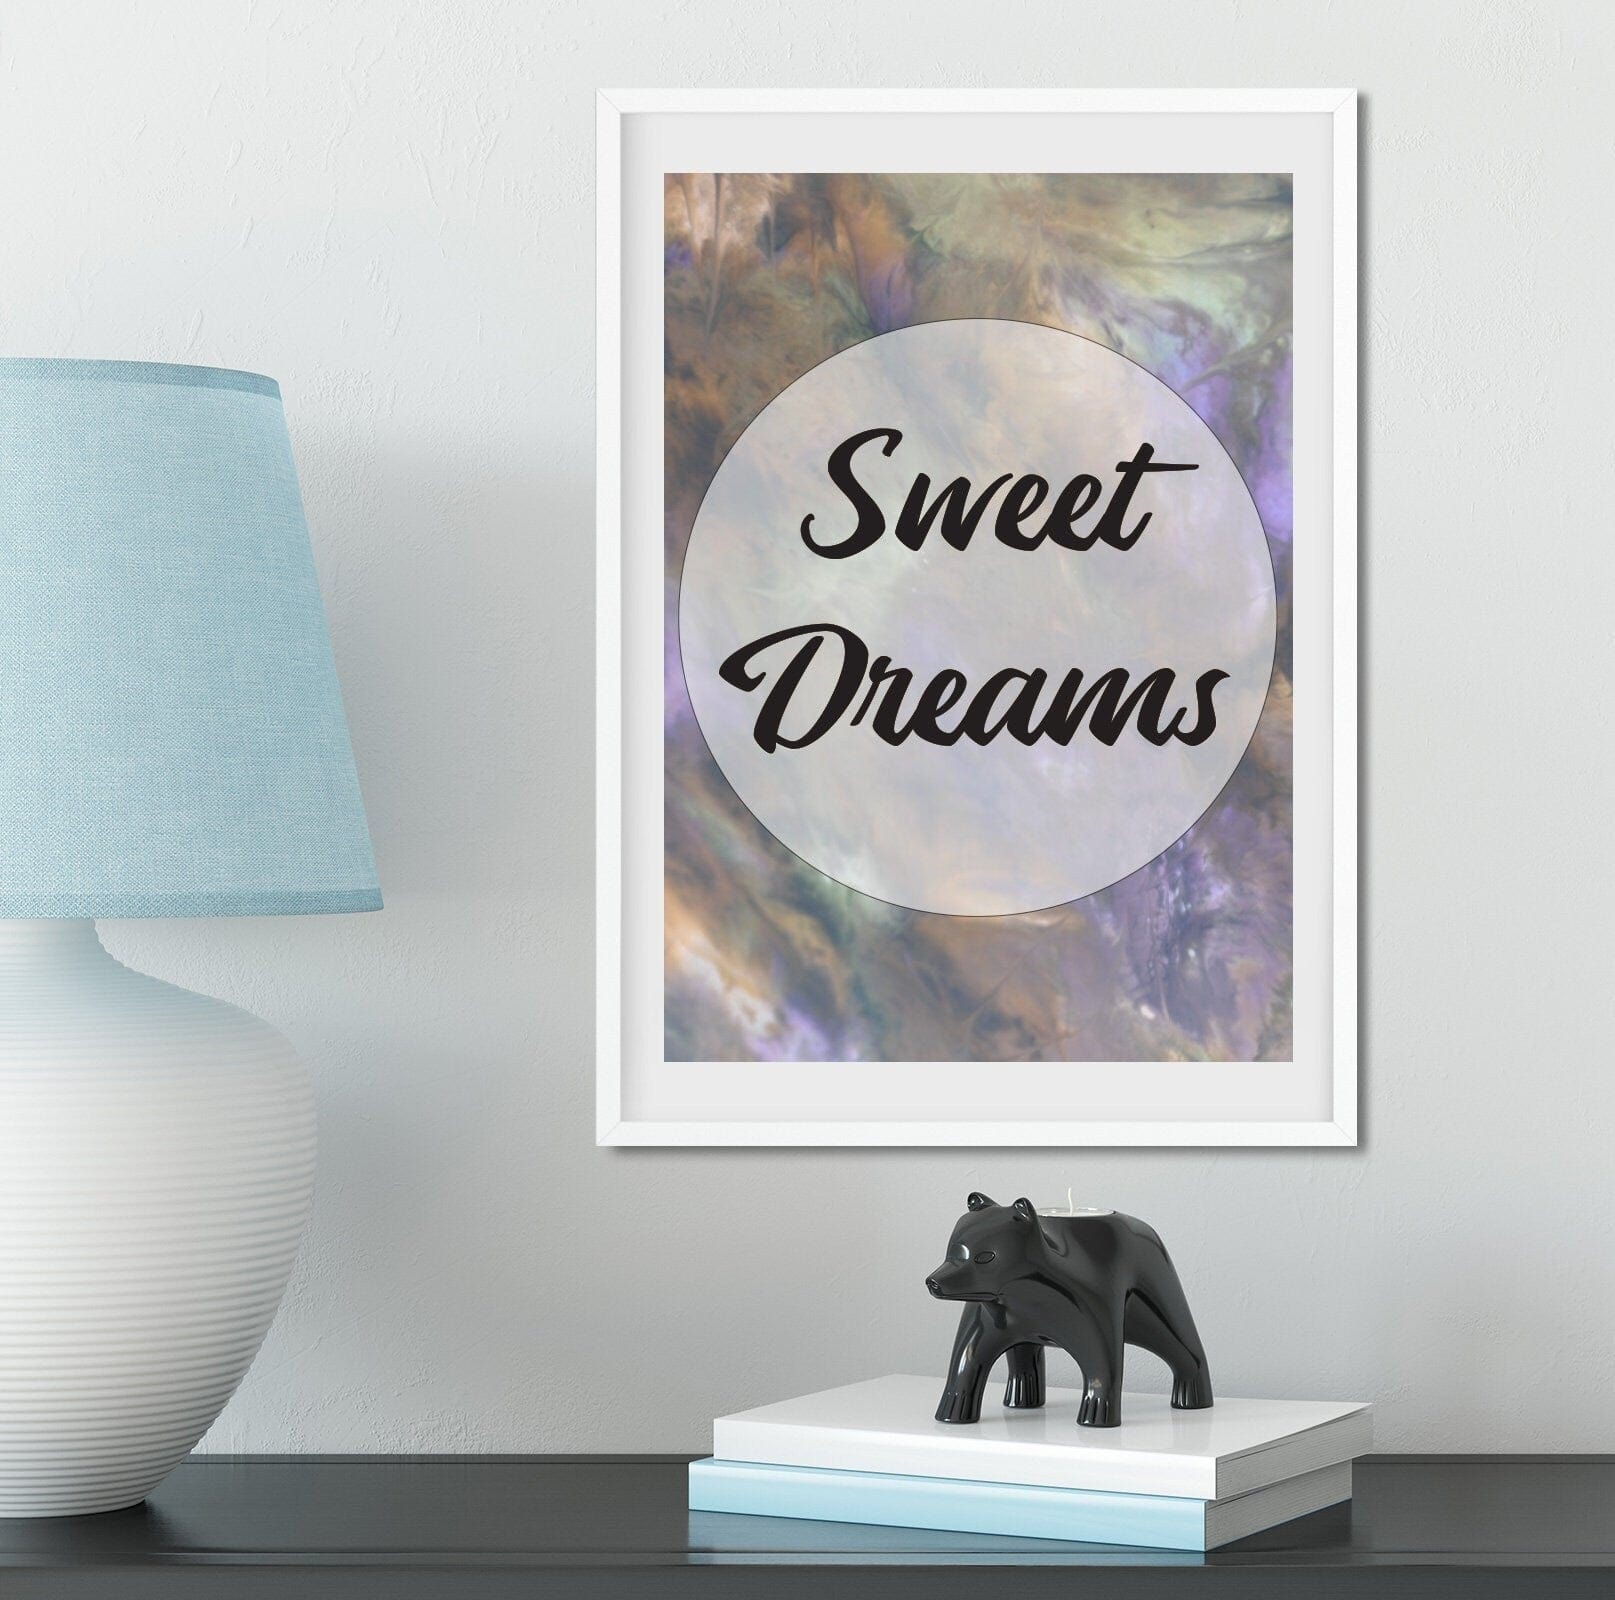 Framed Typography Print, sweet dreams quote print, inspirational print, dream quote bedroom decor